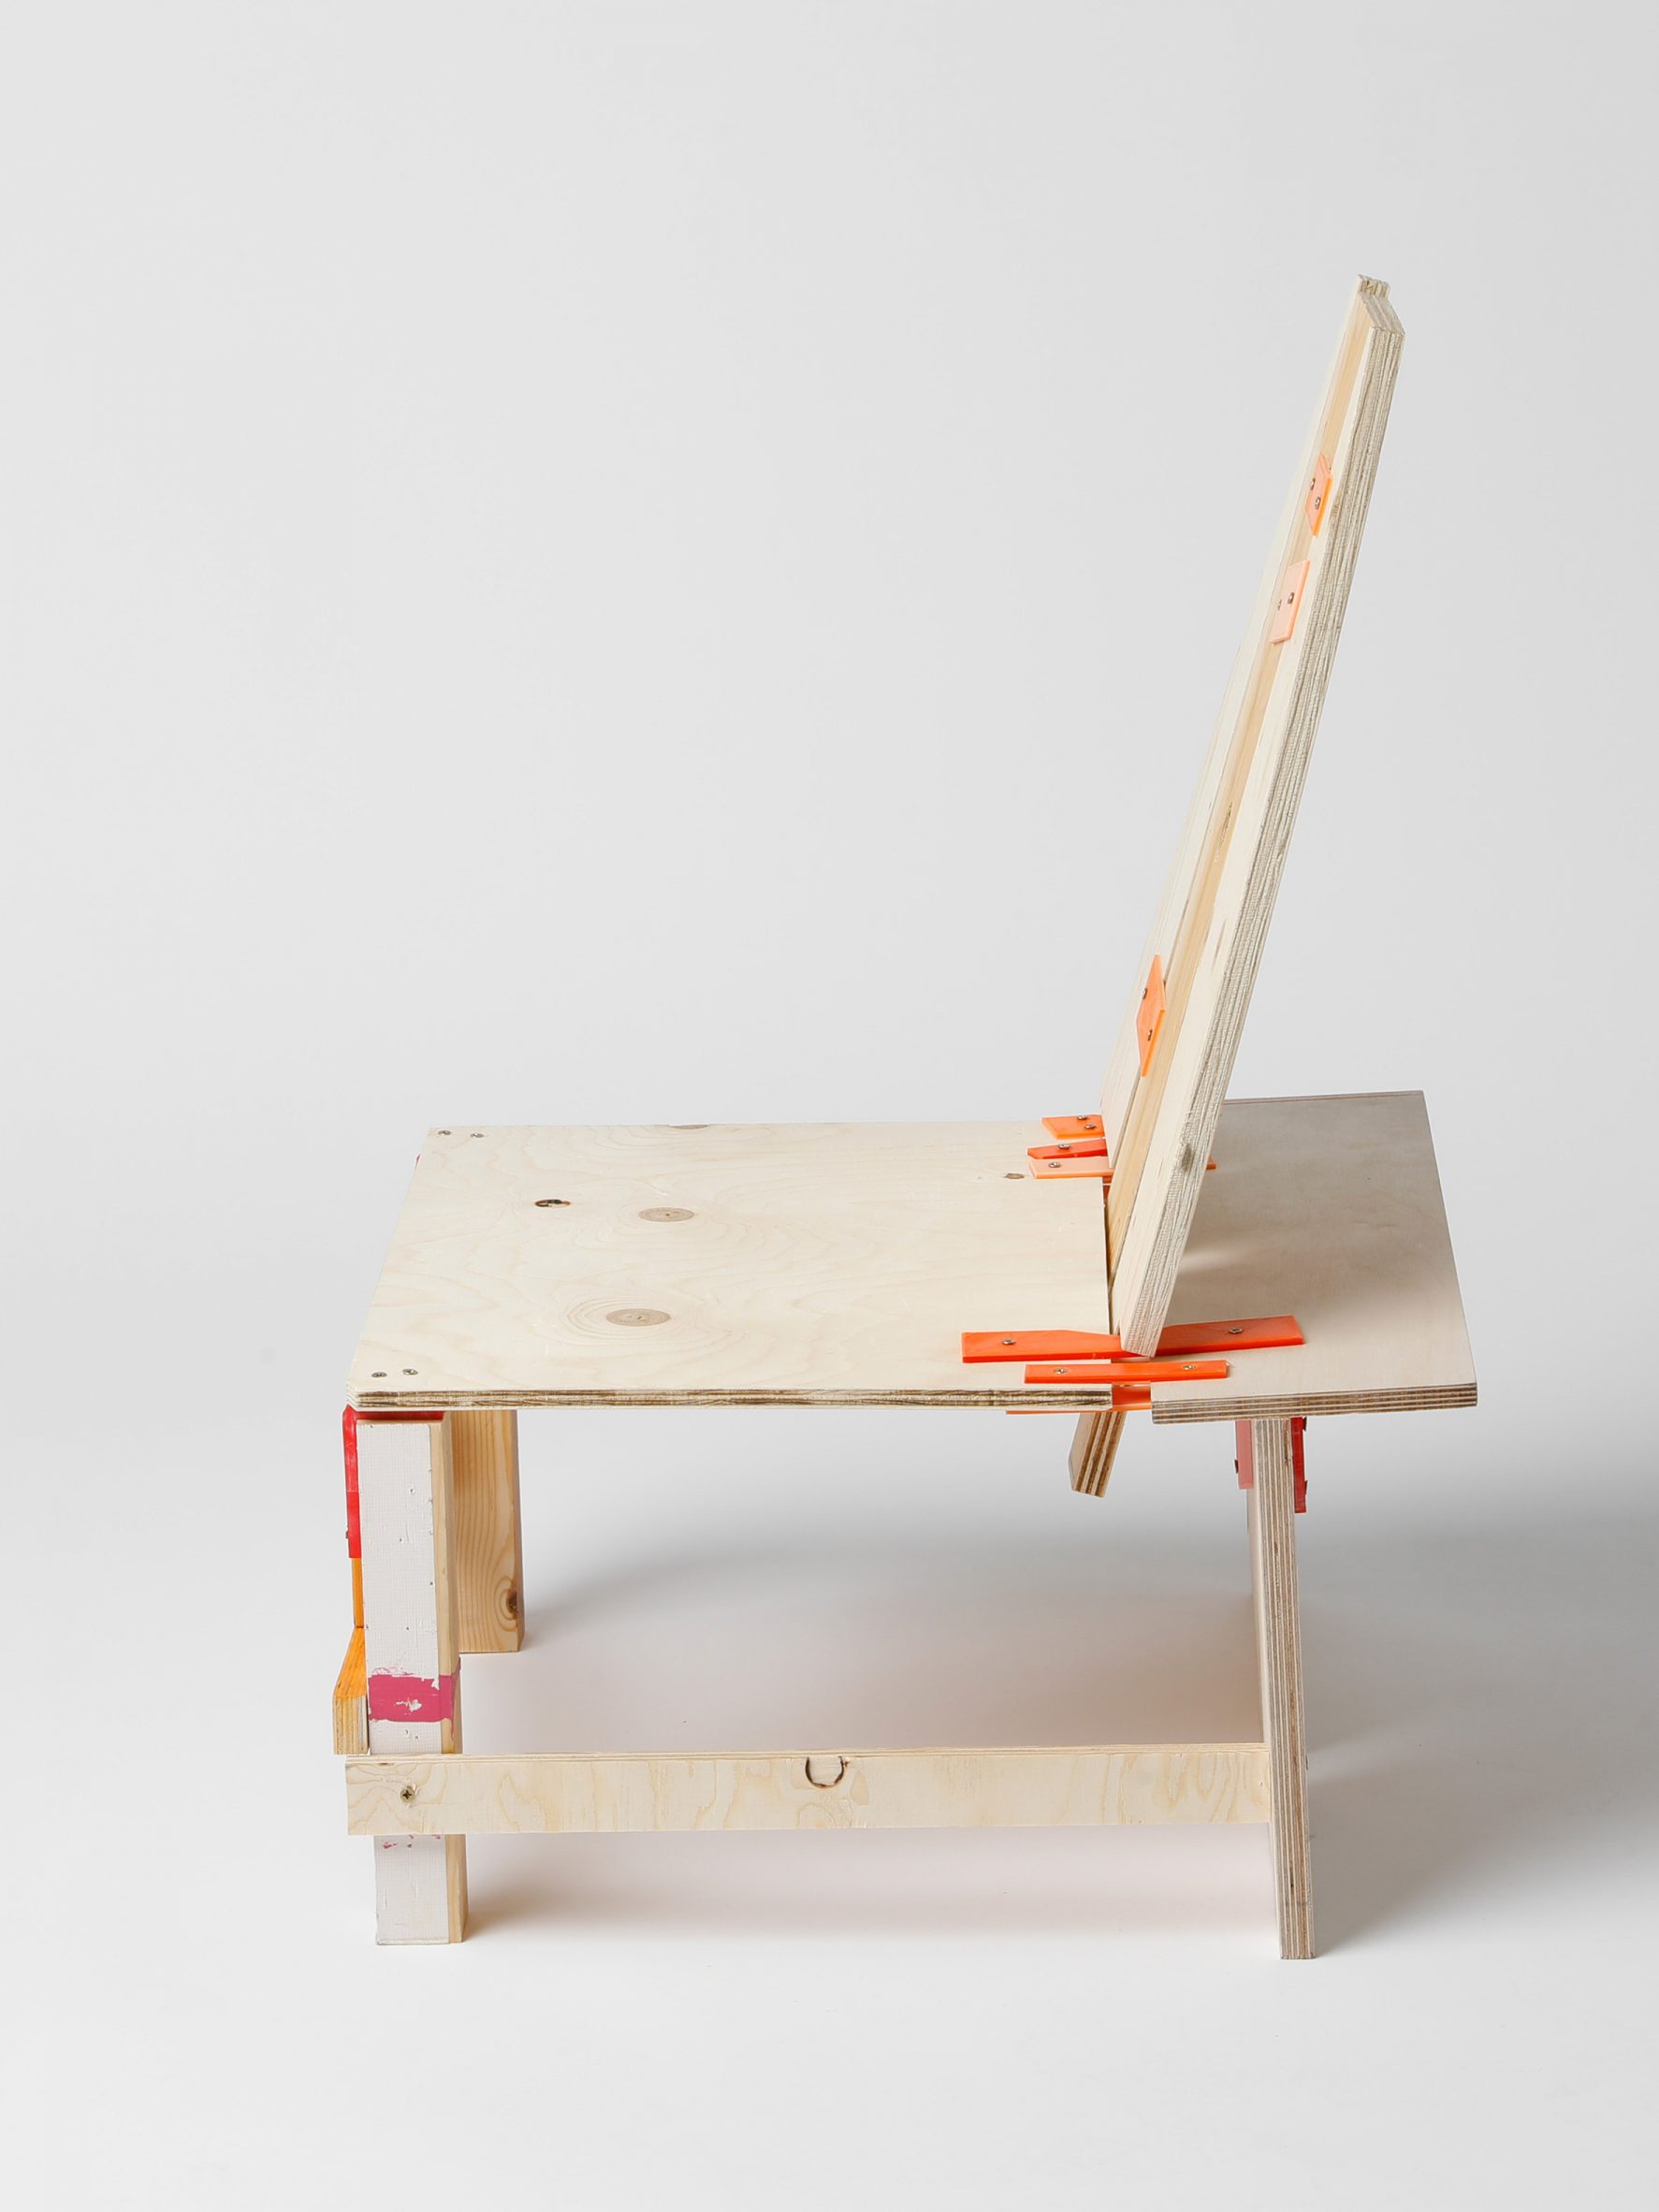 Chair made from pieces of scrap wood using Furniture First Aid Kit by Yalan Dan